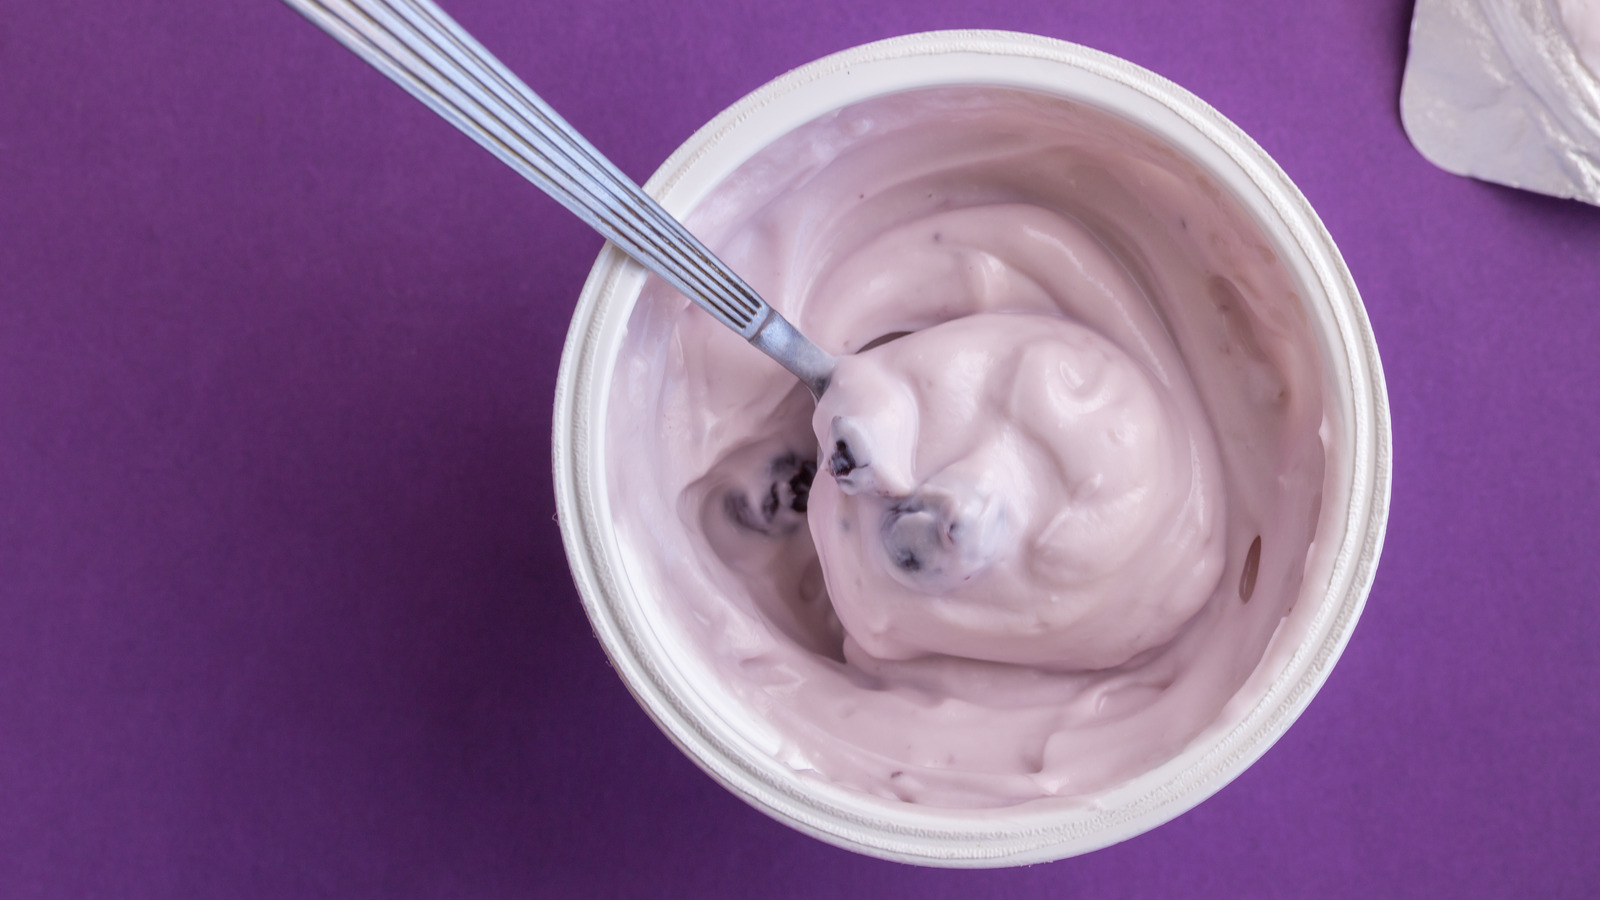 13 Of The Unhealthiest Store-Bought Yogurt Brands